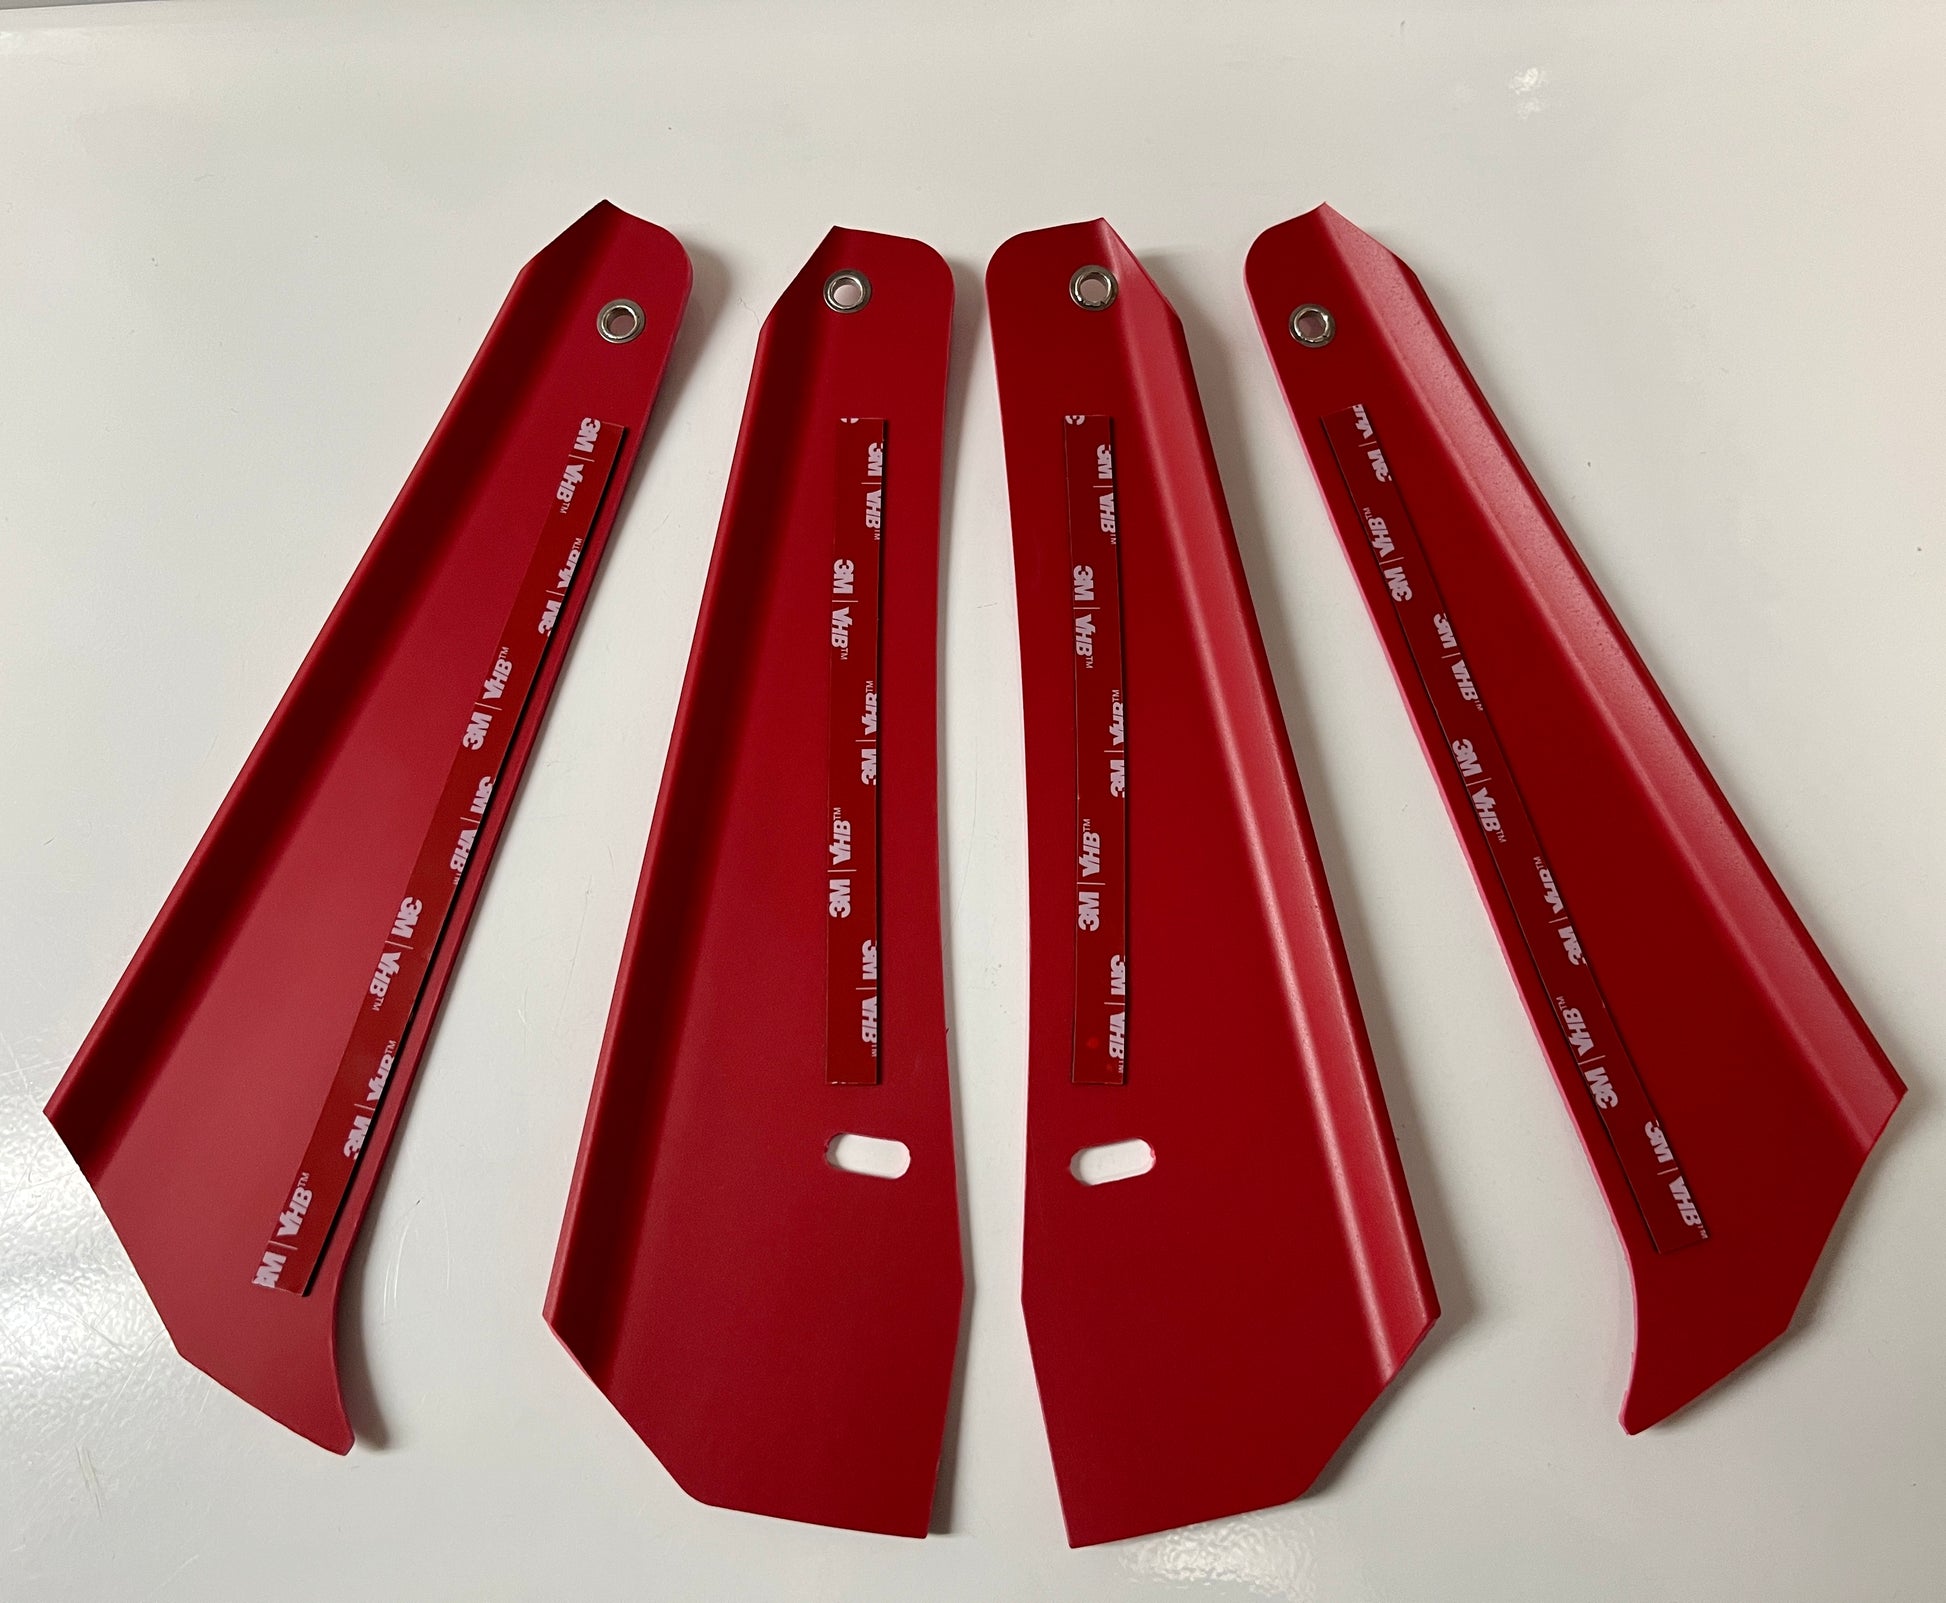 S2000 Red Chip Guards